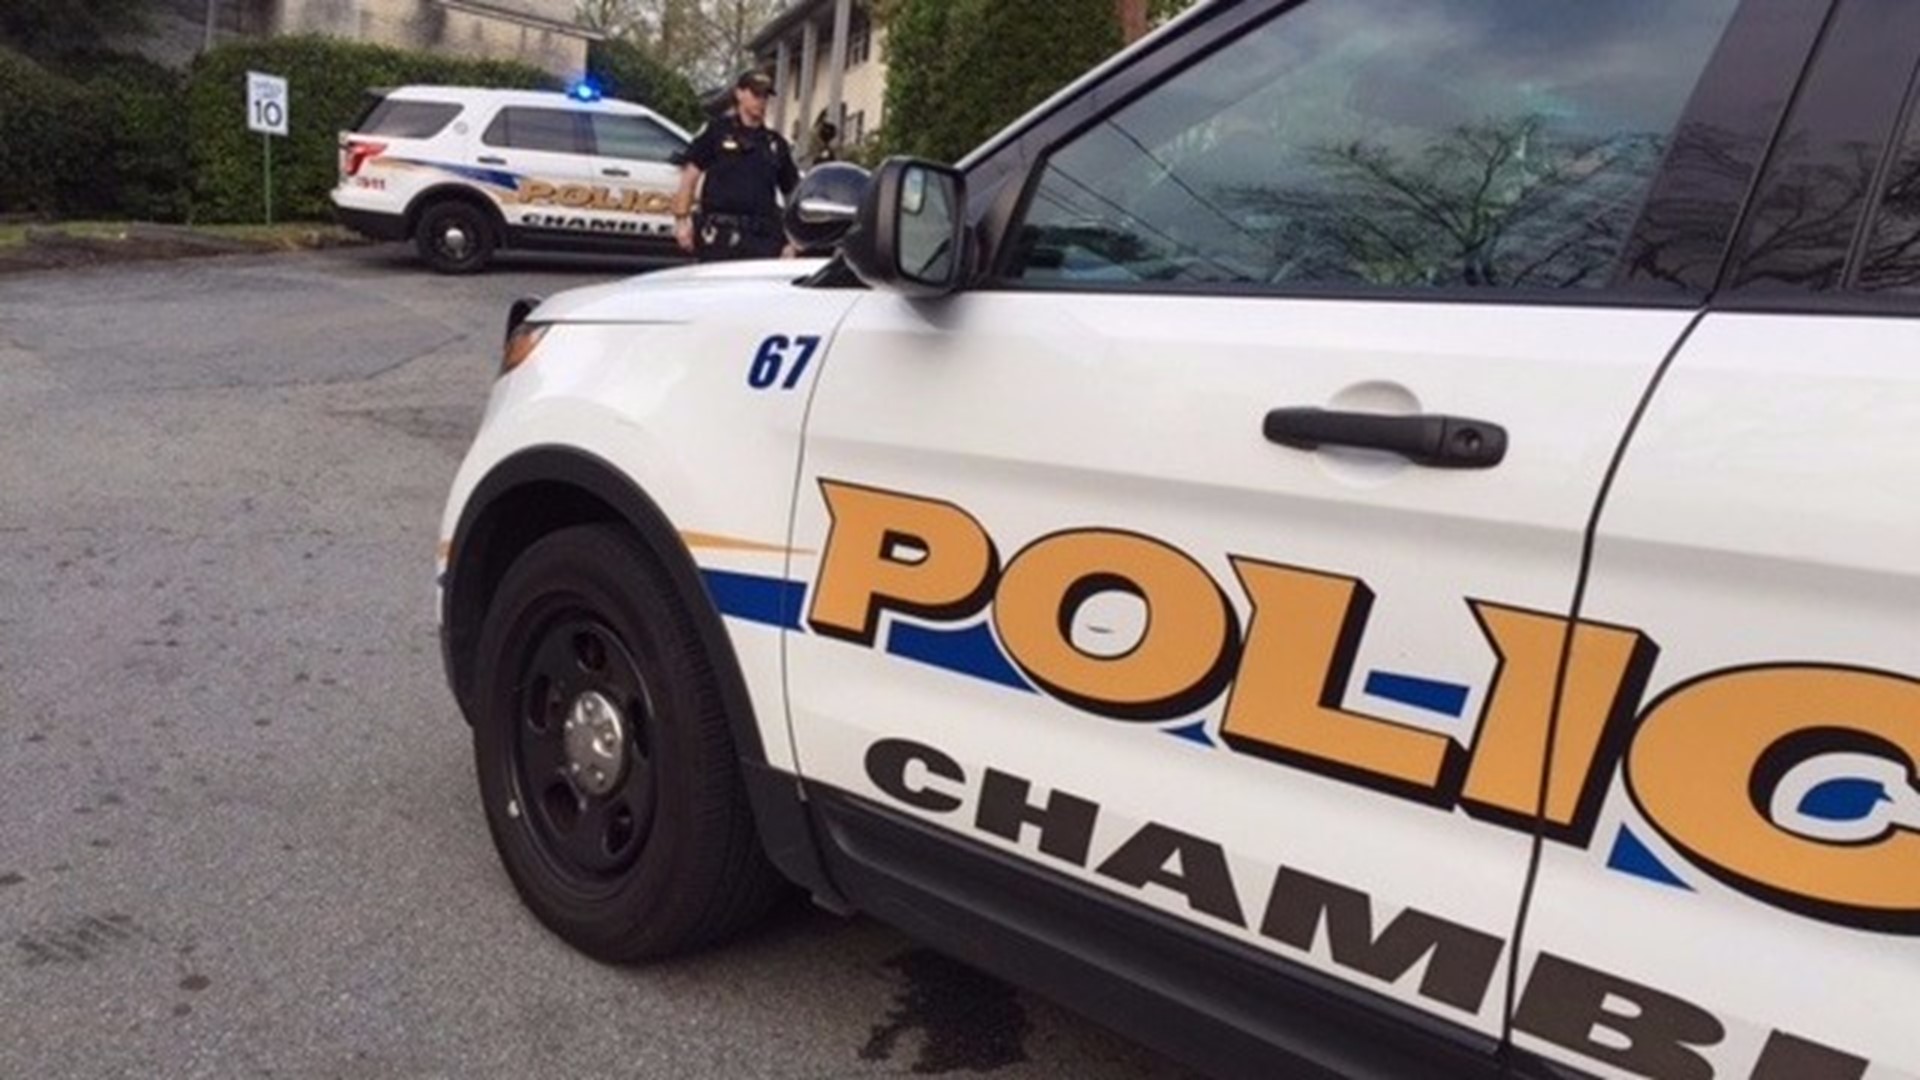 The incident happened around 6:30 a.m. at the Chamblee Heights Apartments at 136 Wiggins Way, Chamblee, GA.